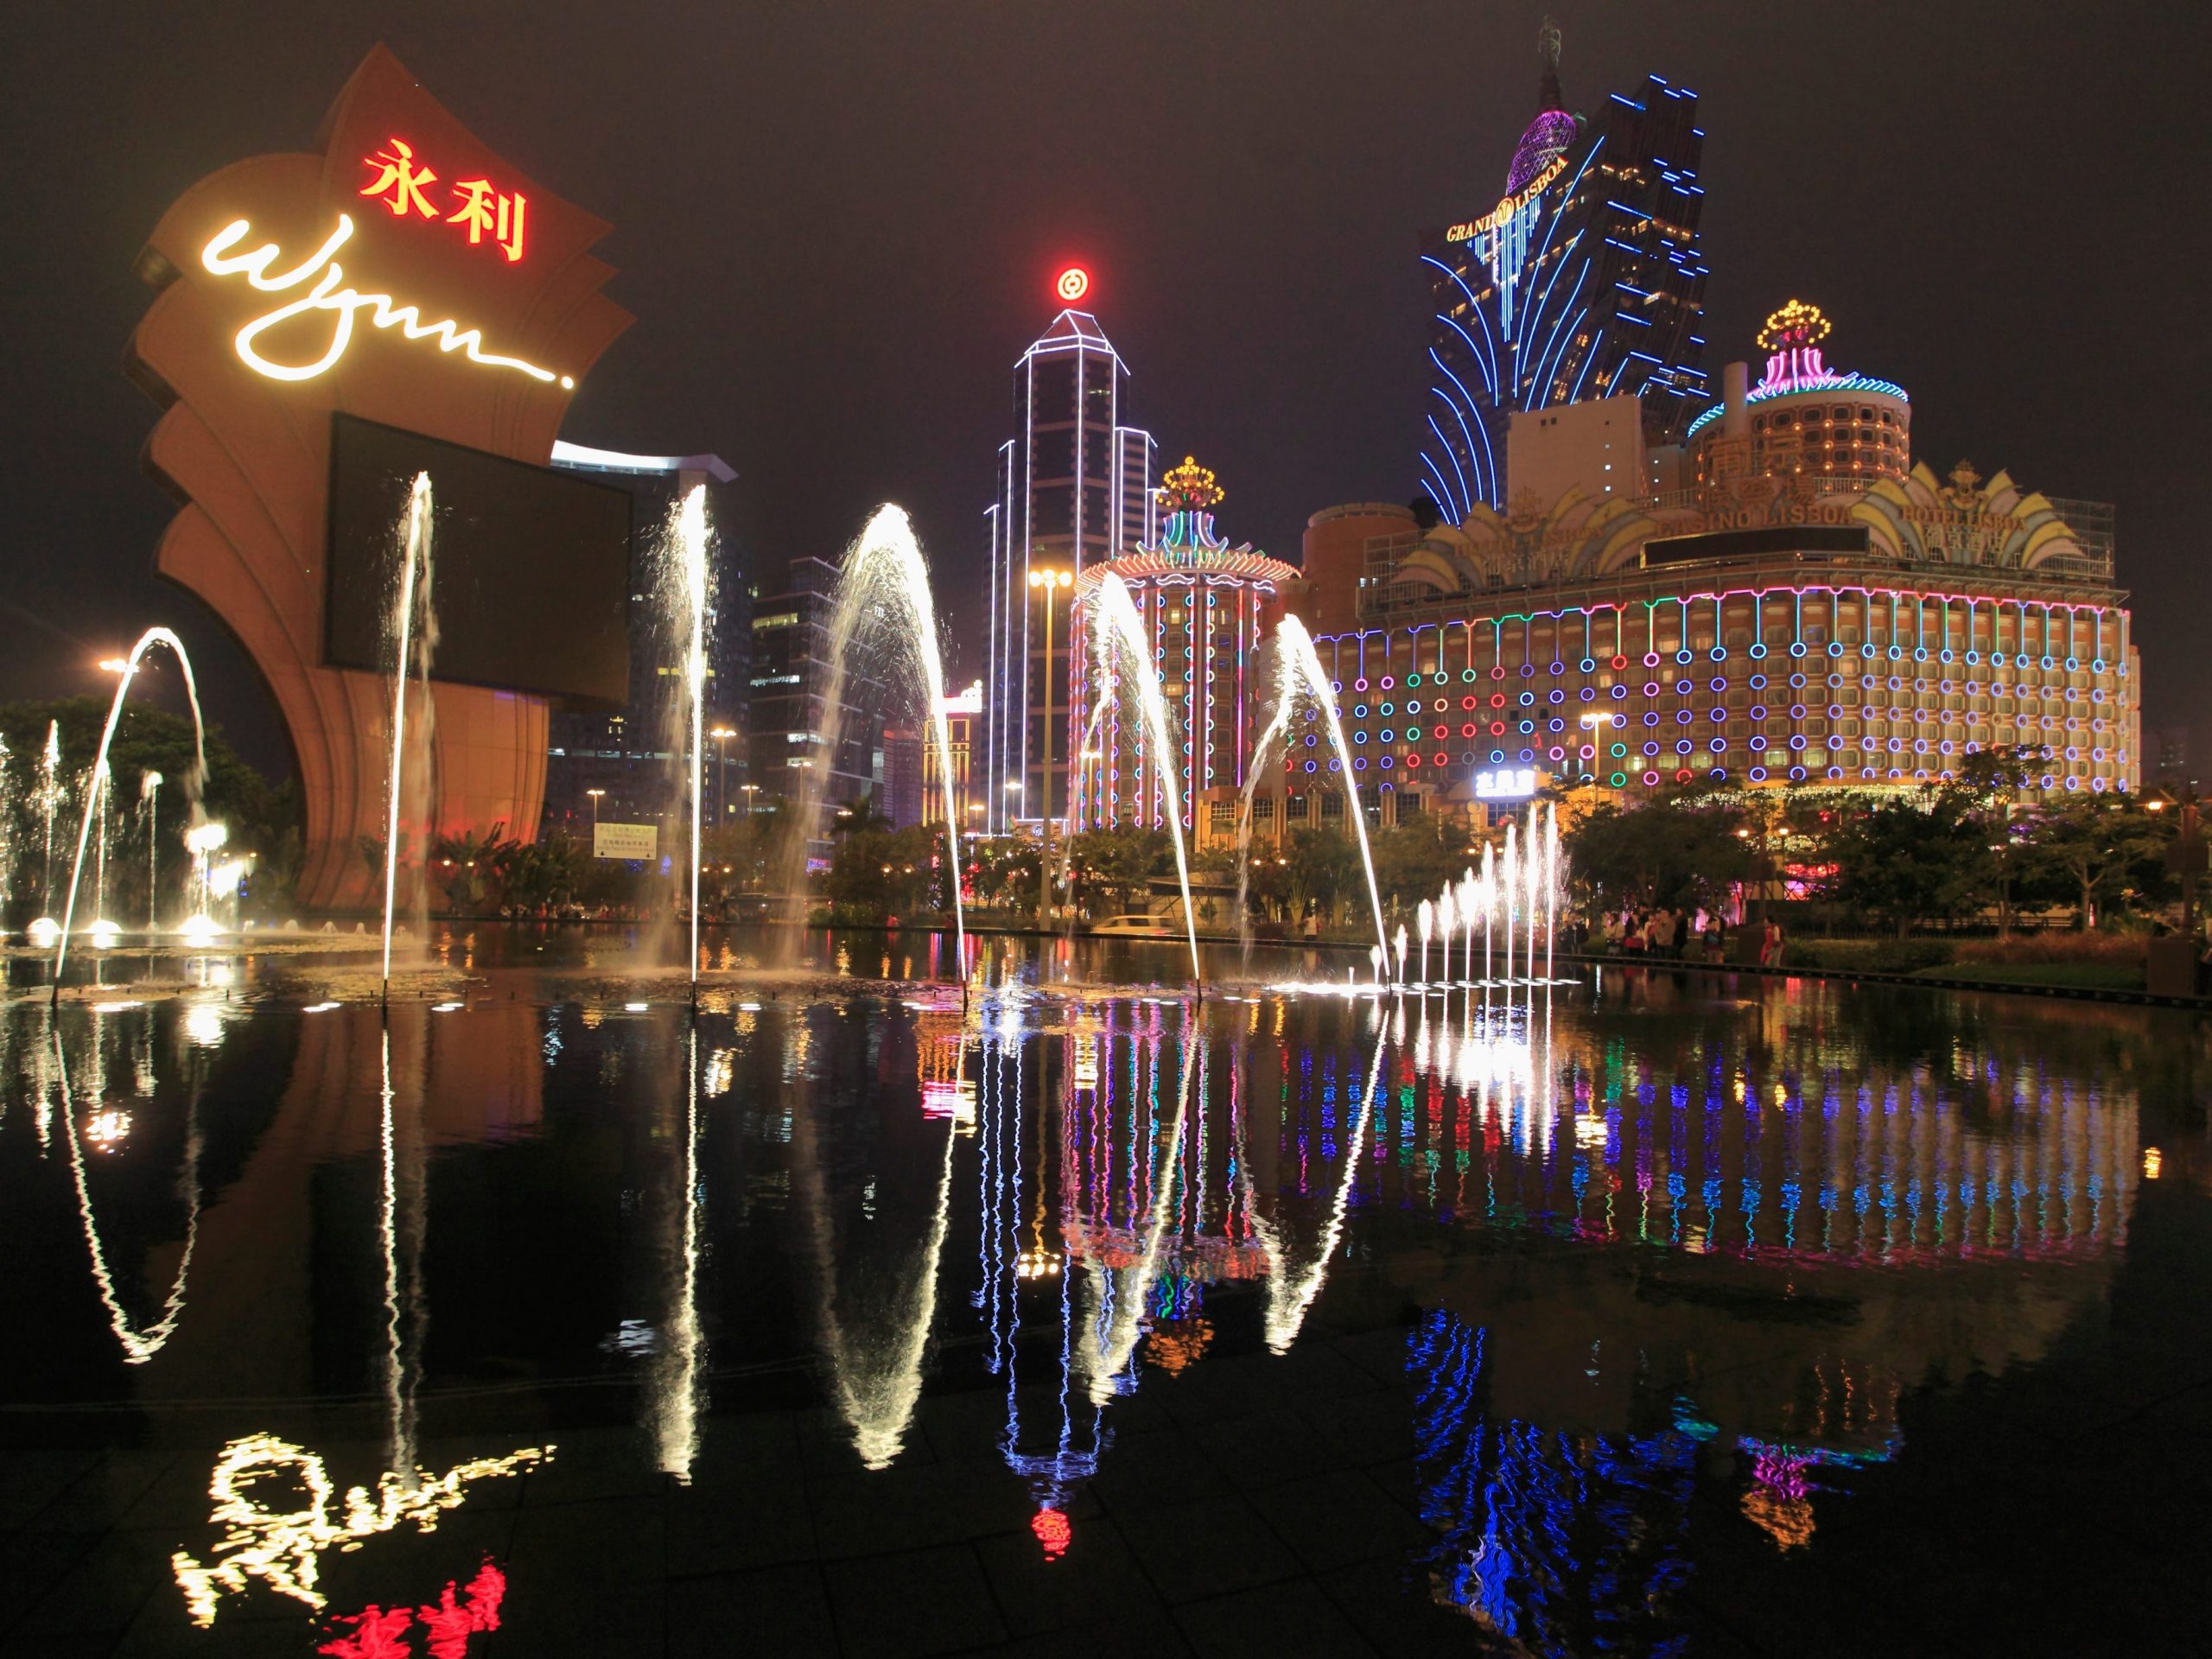 Macau at night with illuminated fountains and a Wynn resort in the background